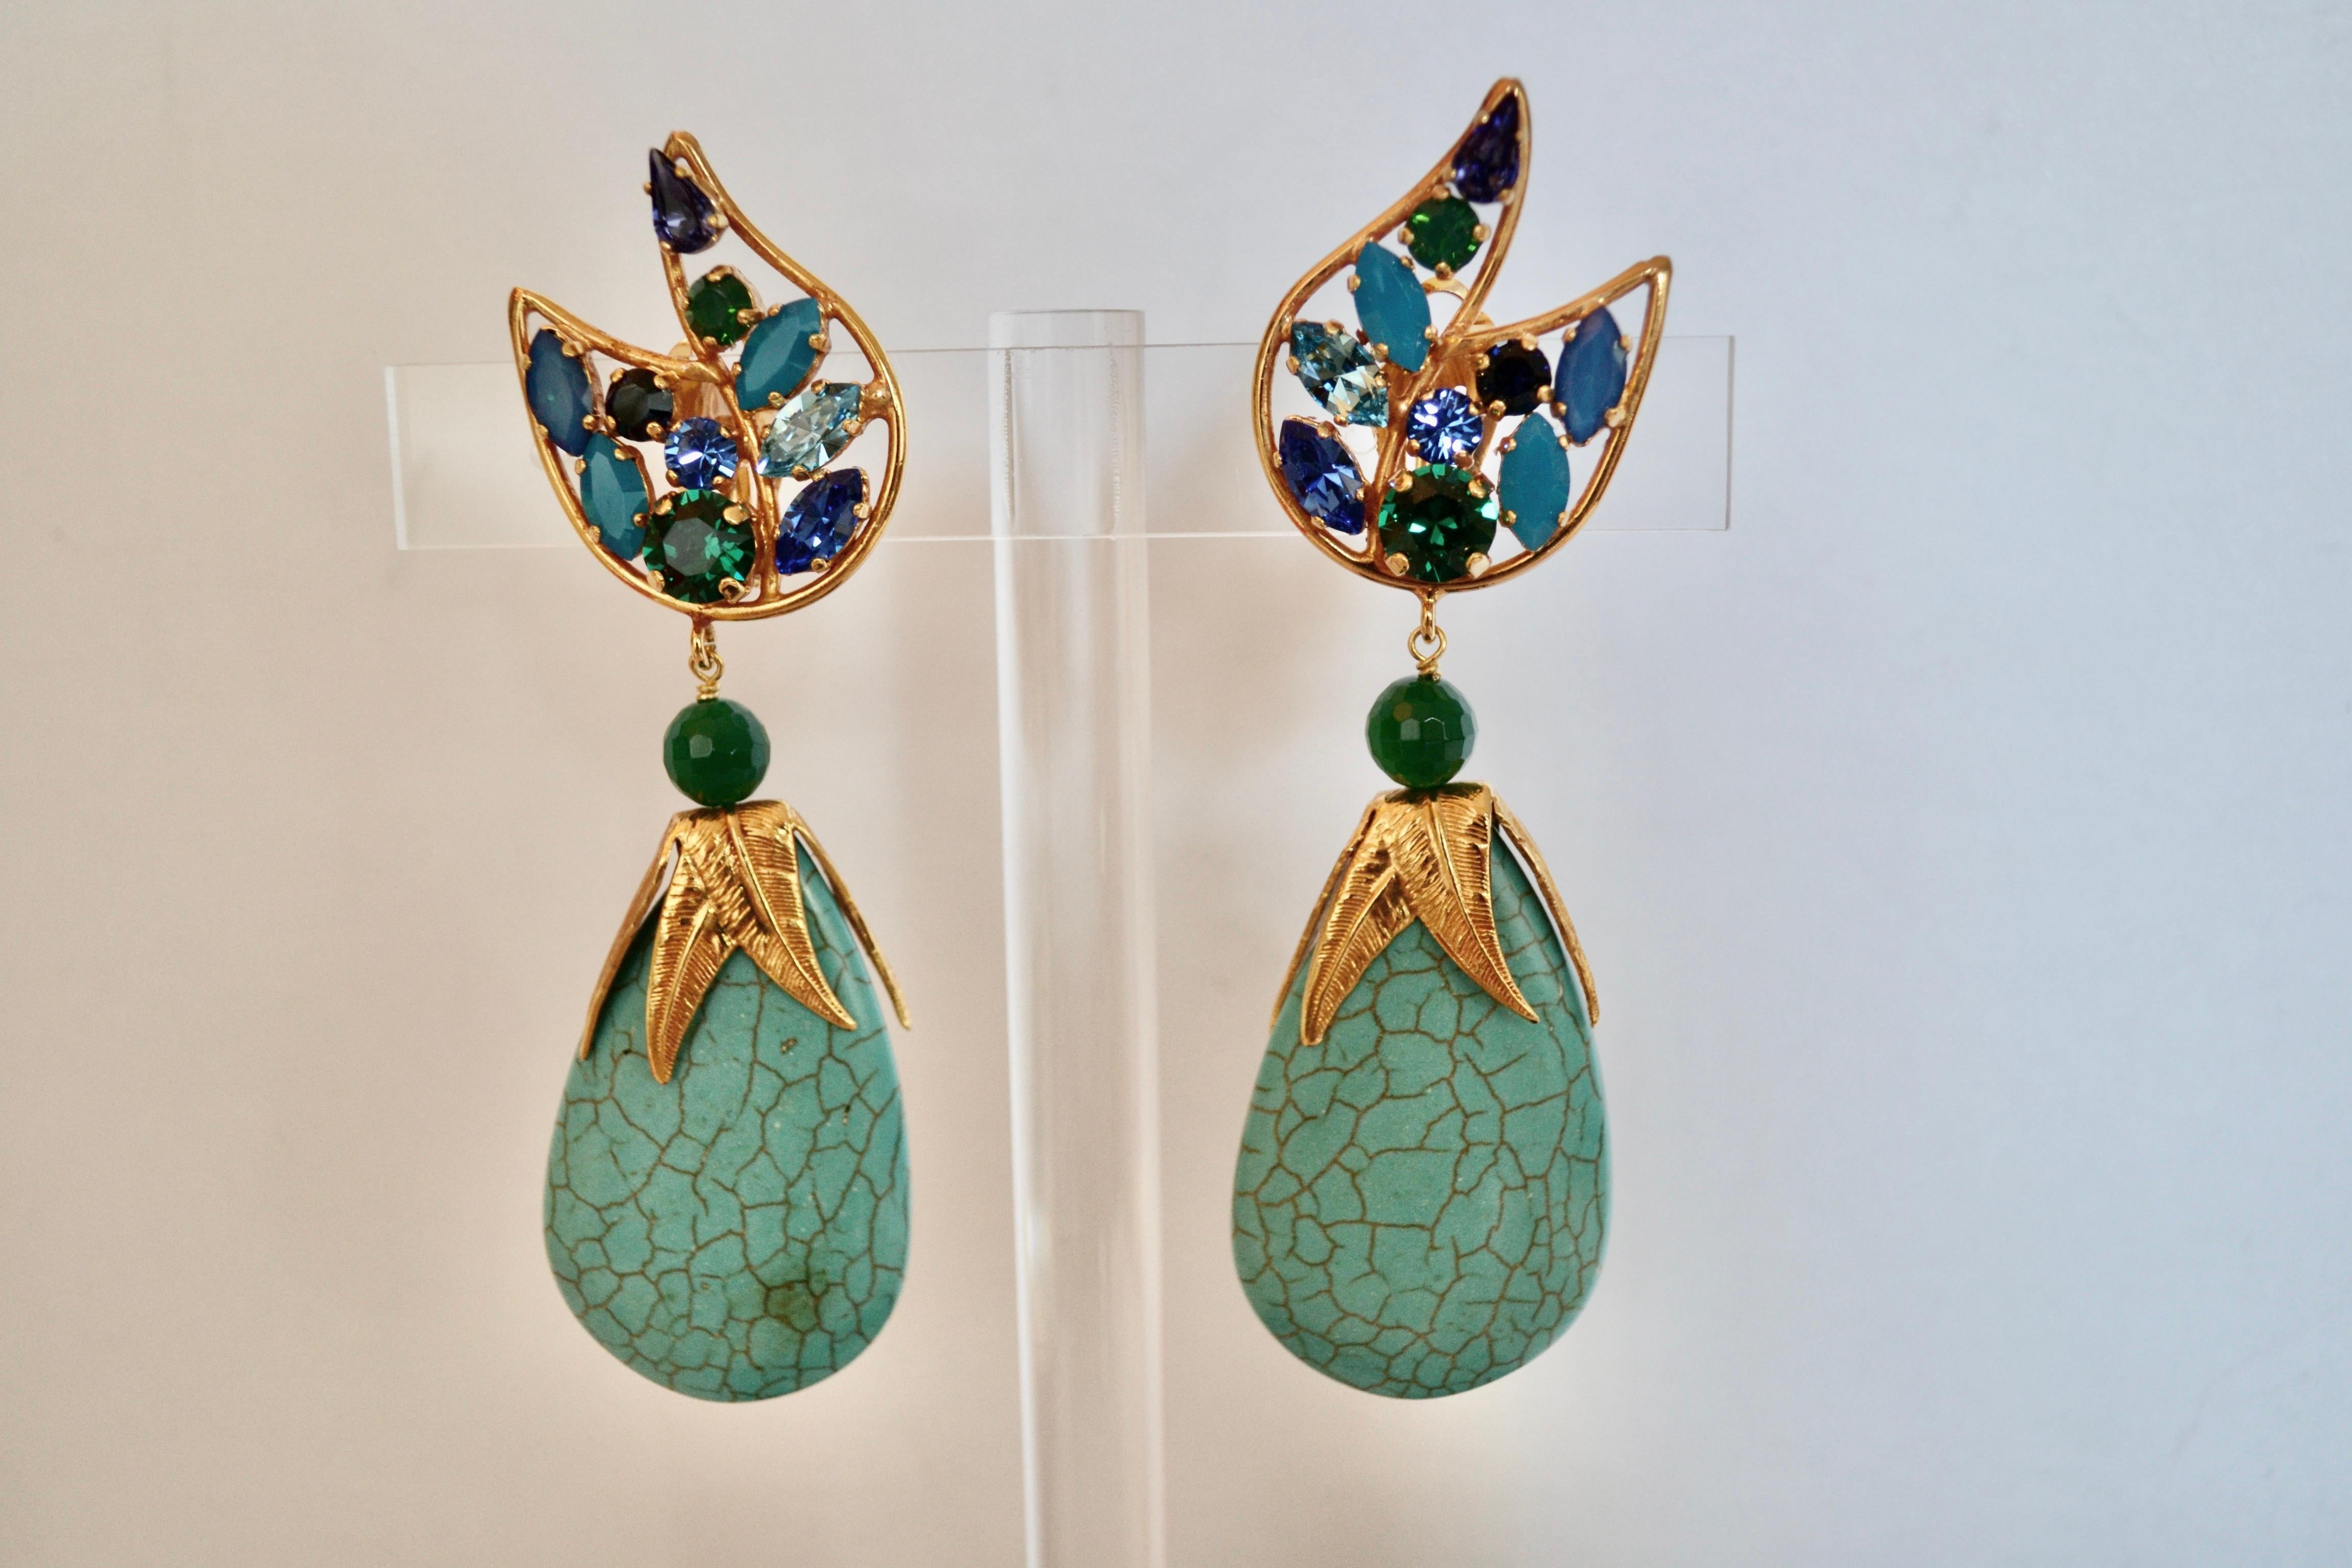 Clip earrings with Swarovski Crystal in wing design. Turquoise drop set on gold metal.
From the limited 